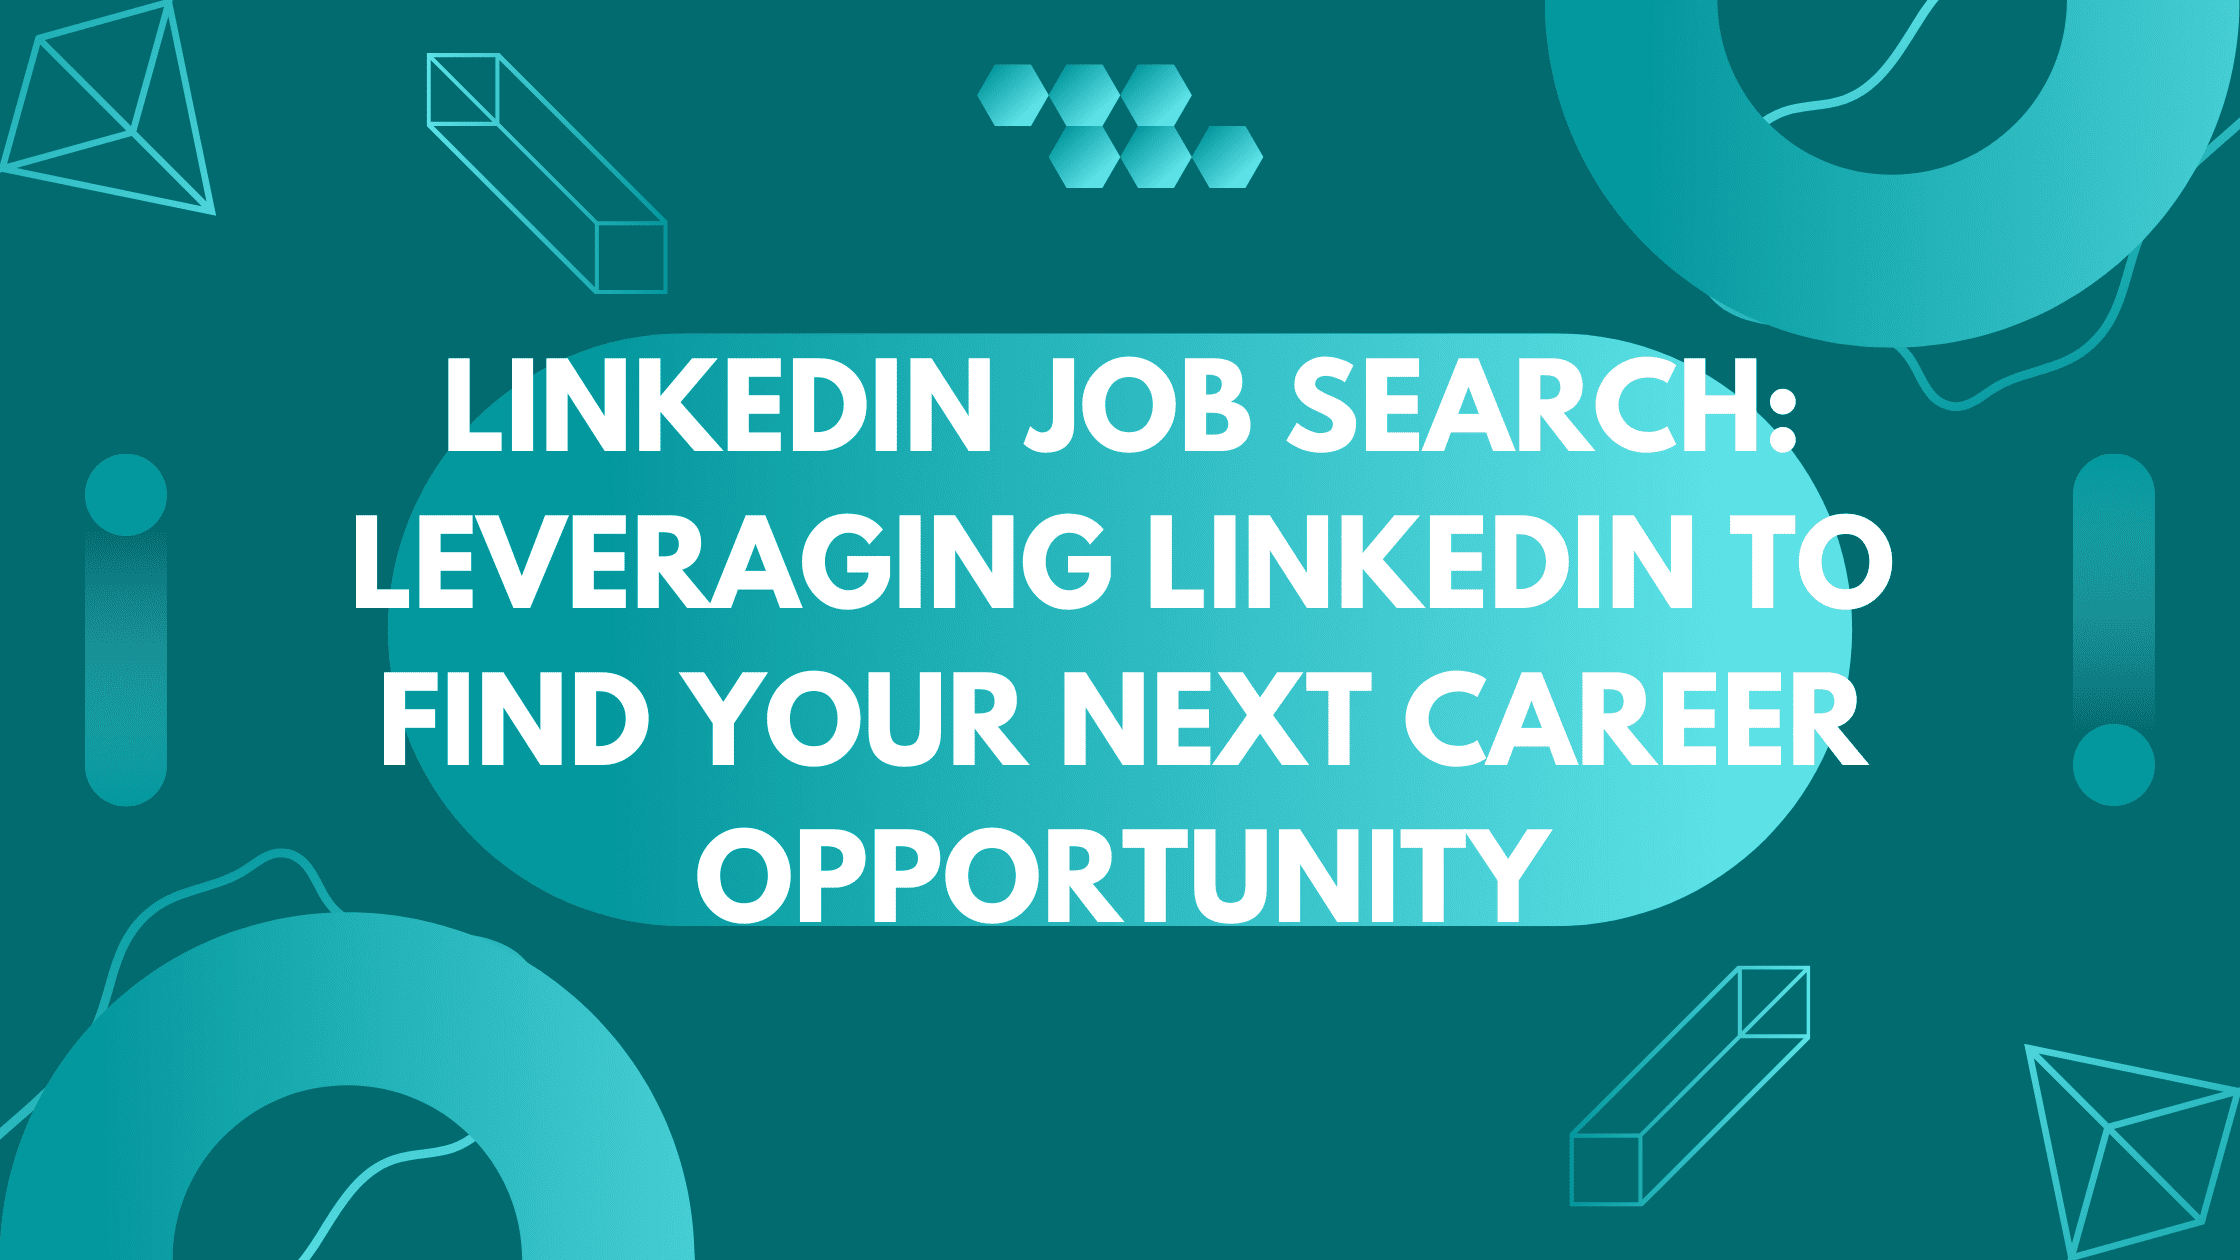 LinkedIn Job Search: Leveraging LinkedIn to Find Your Next Career Opportunity